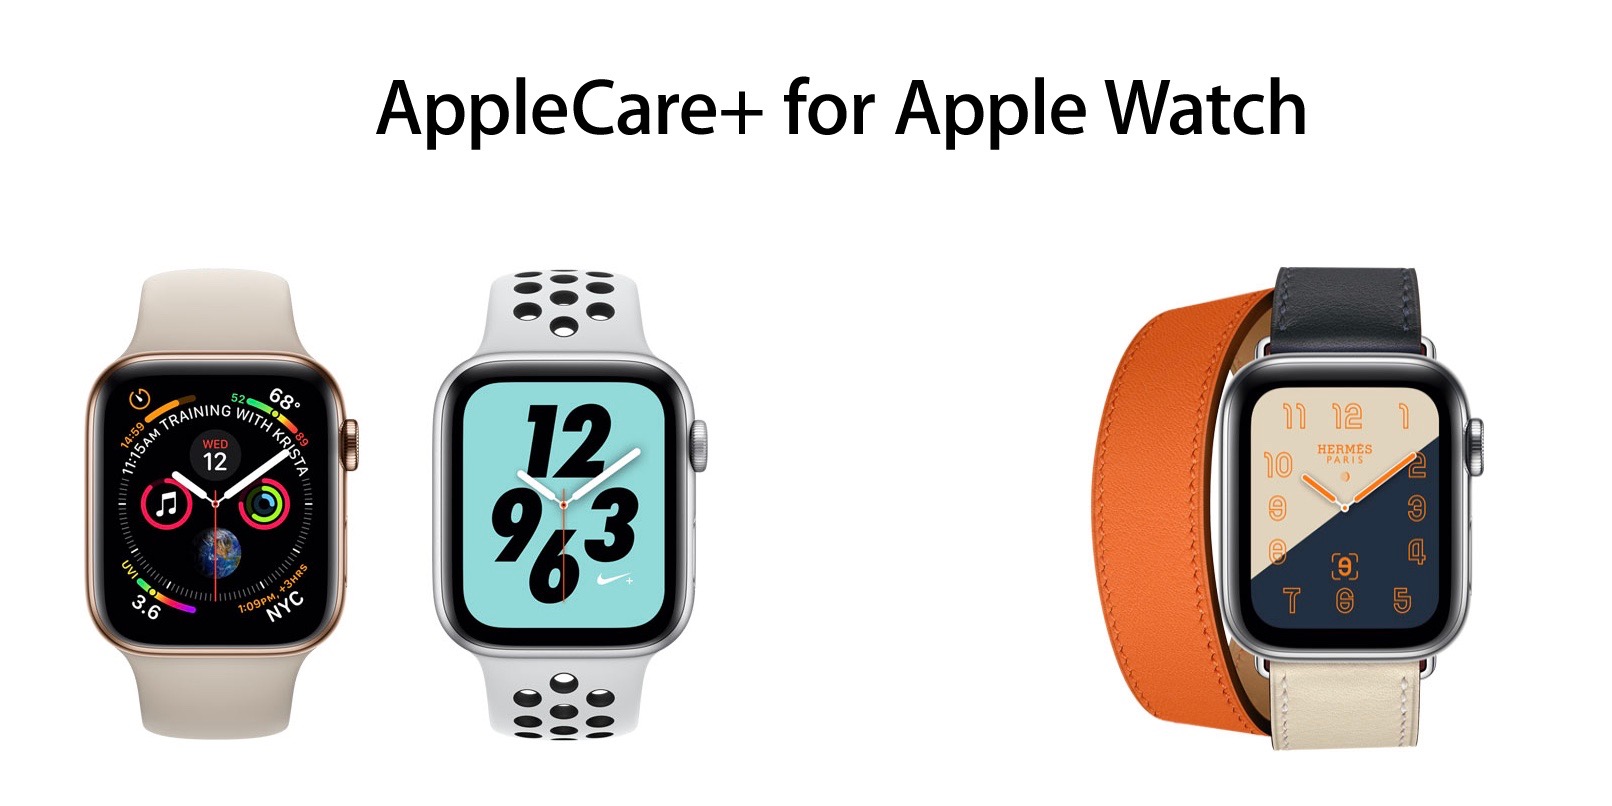 can you buy applecare after purchase apple watch